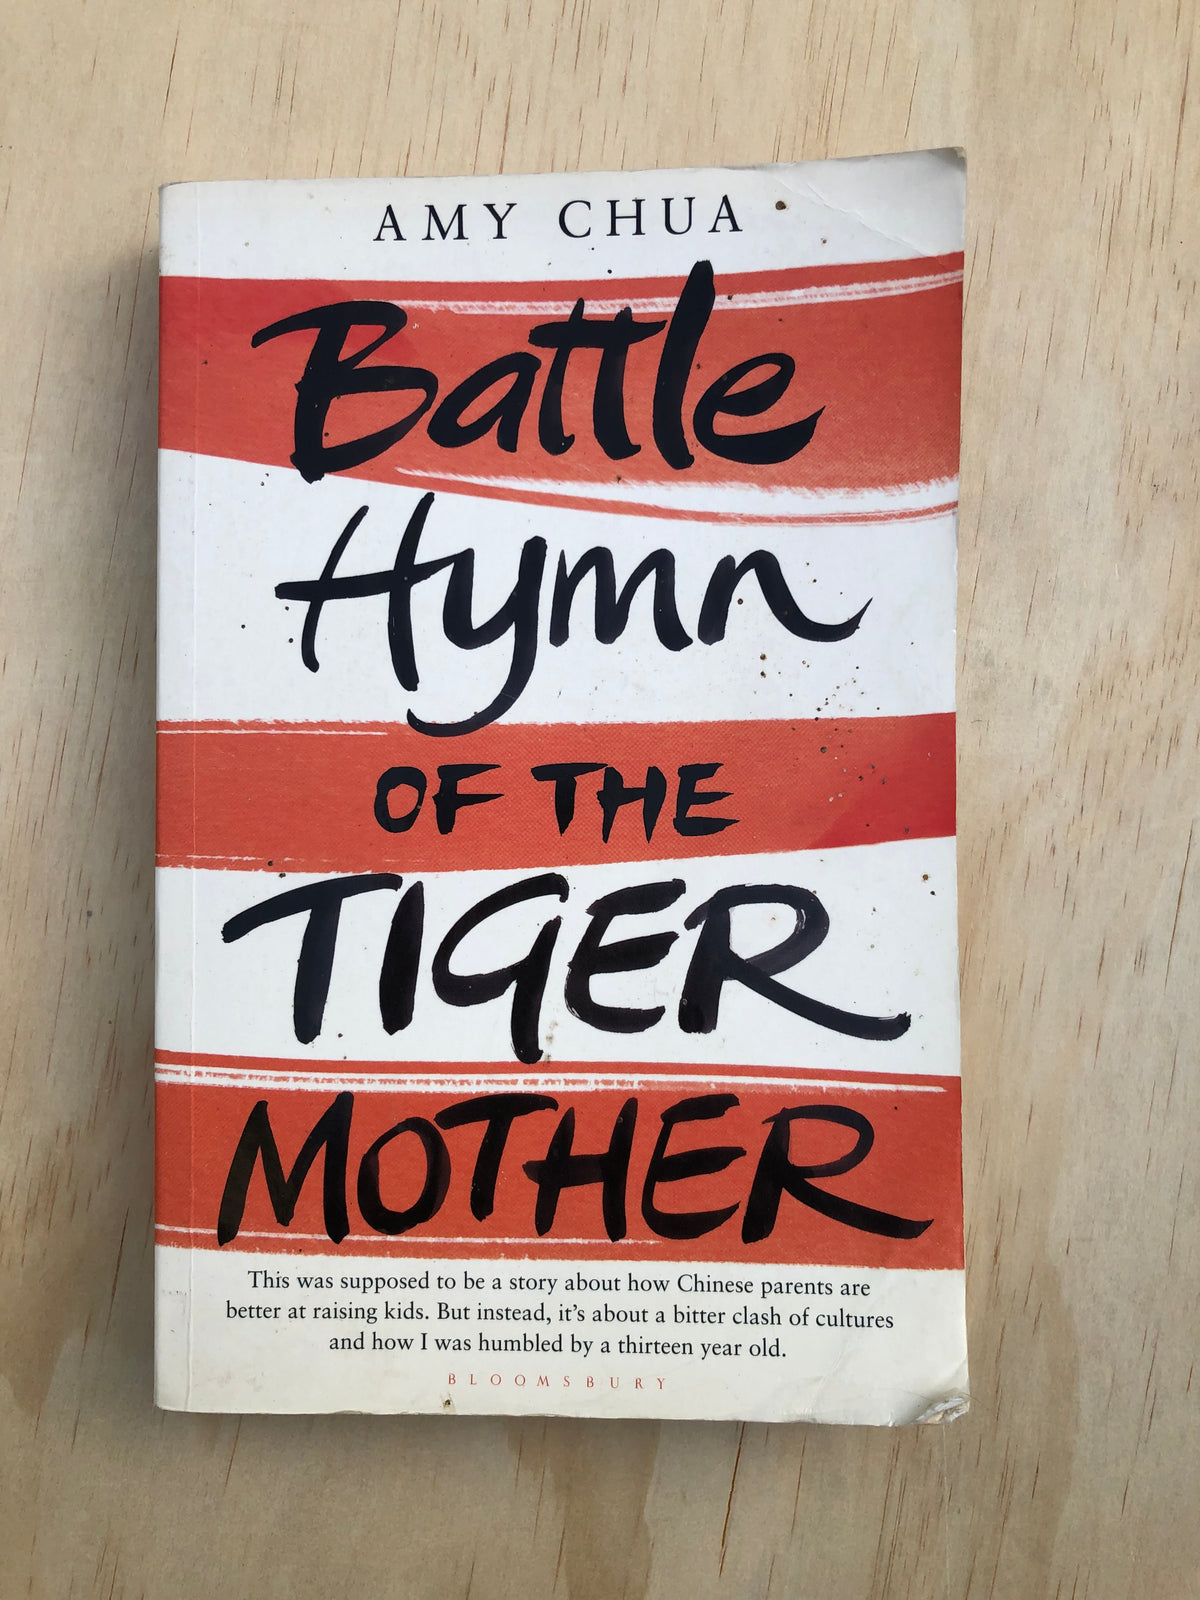 Battle Hymn of the Tiger Mother - Amy Chua